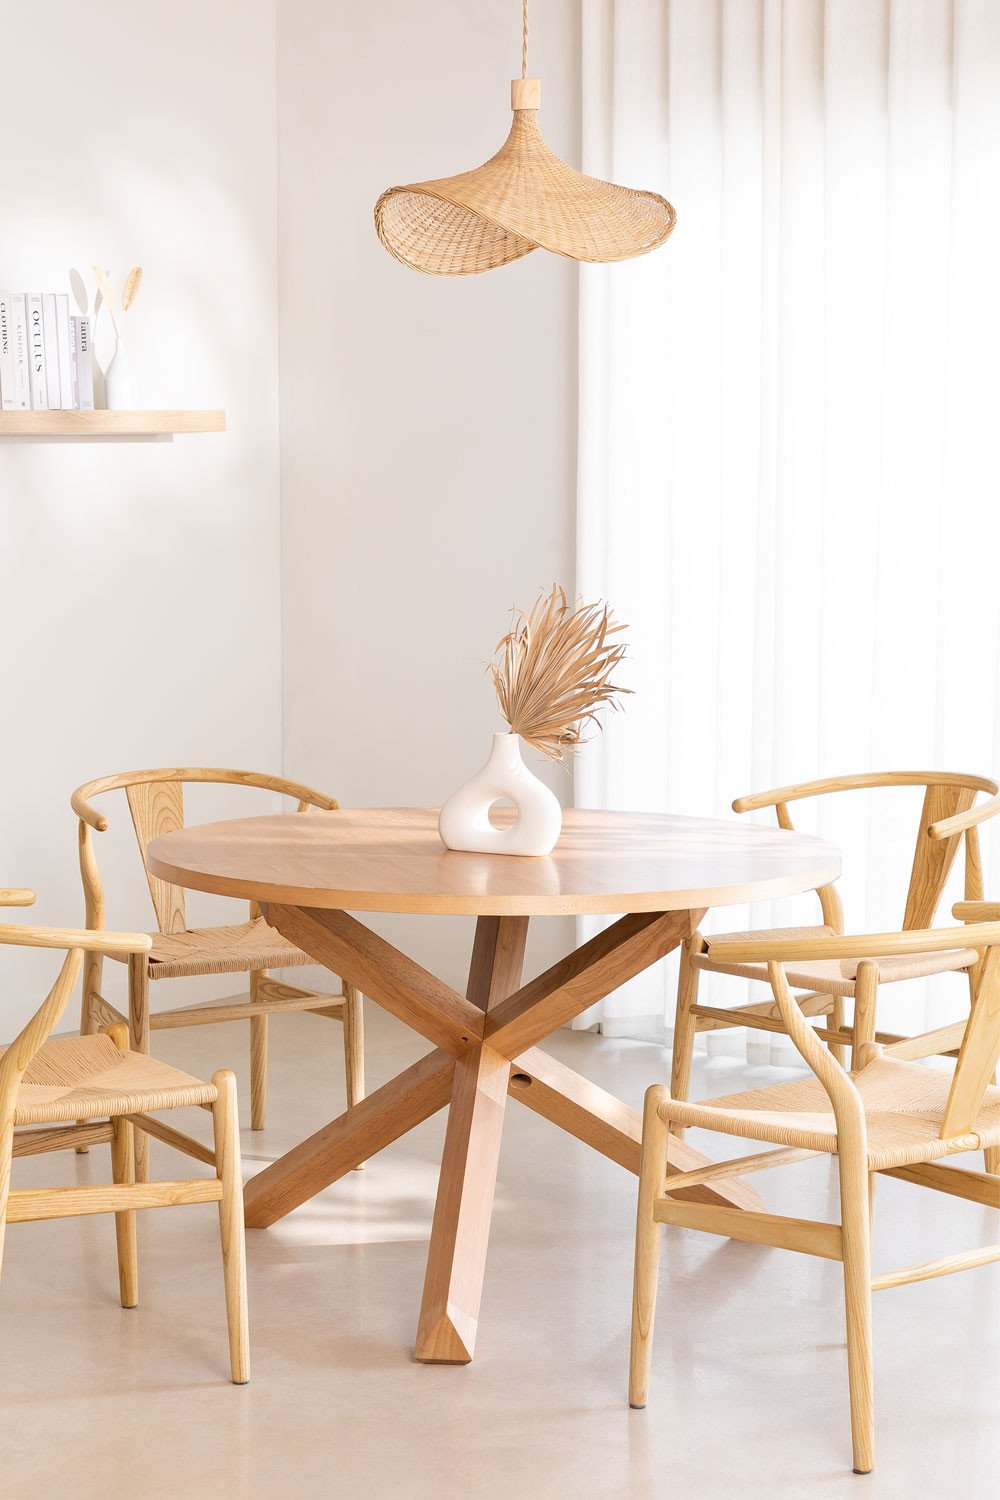 Round Dining Table in MDF and Wood (Ø120 cm) Mieren, gallery image 1